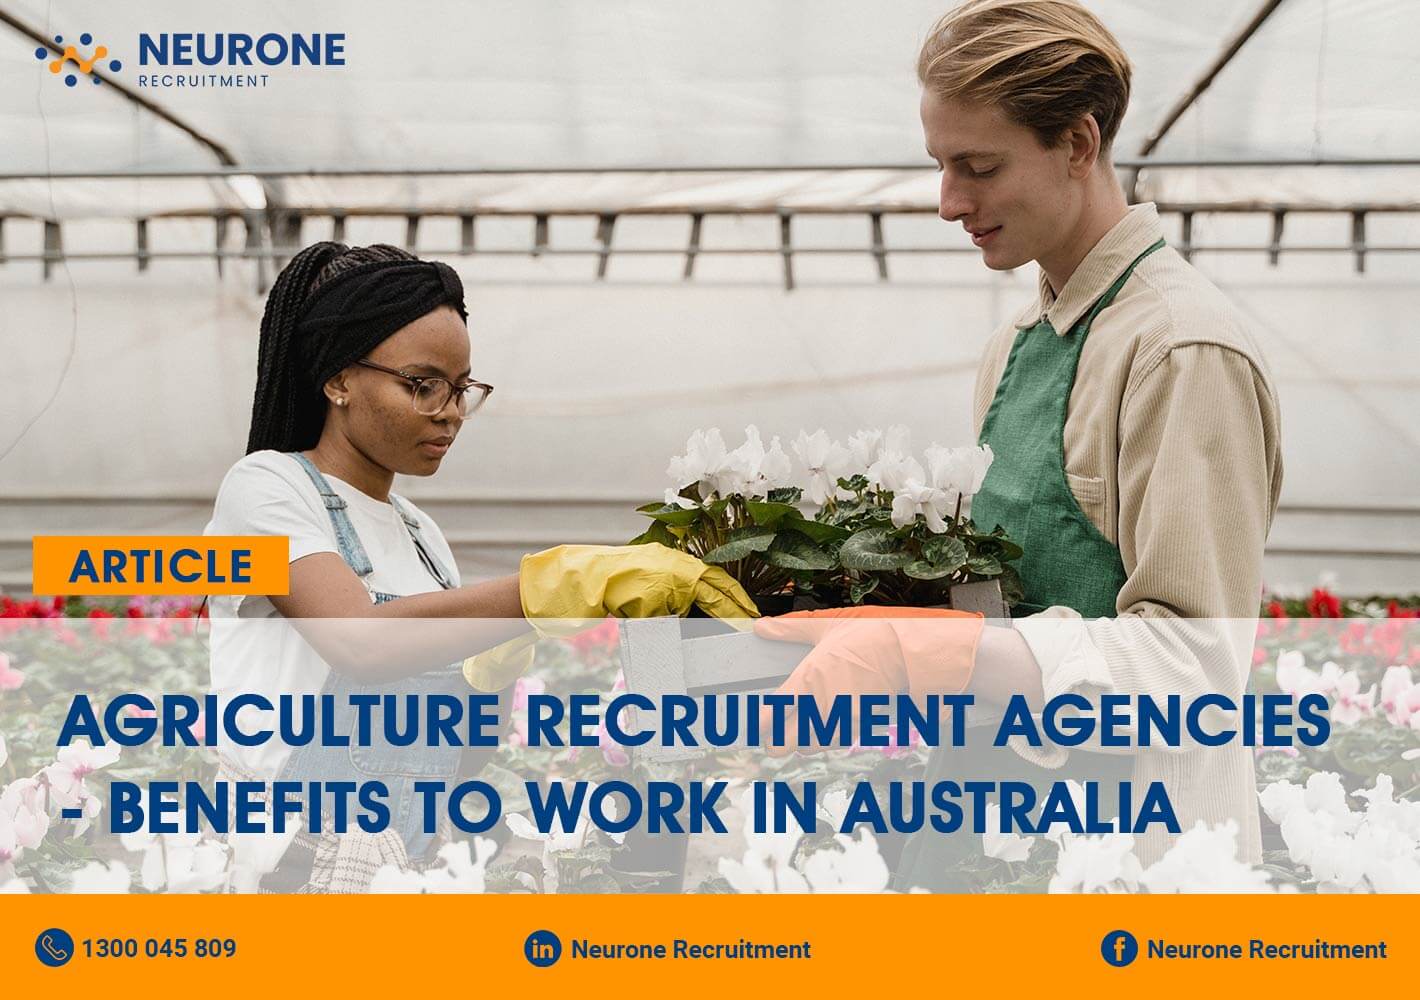 Agriculture Recruitment Agencies - Benefits to Work in Australia